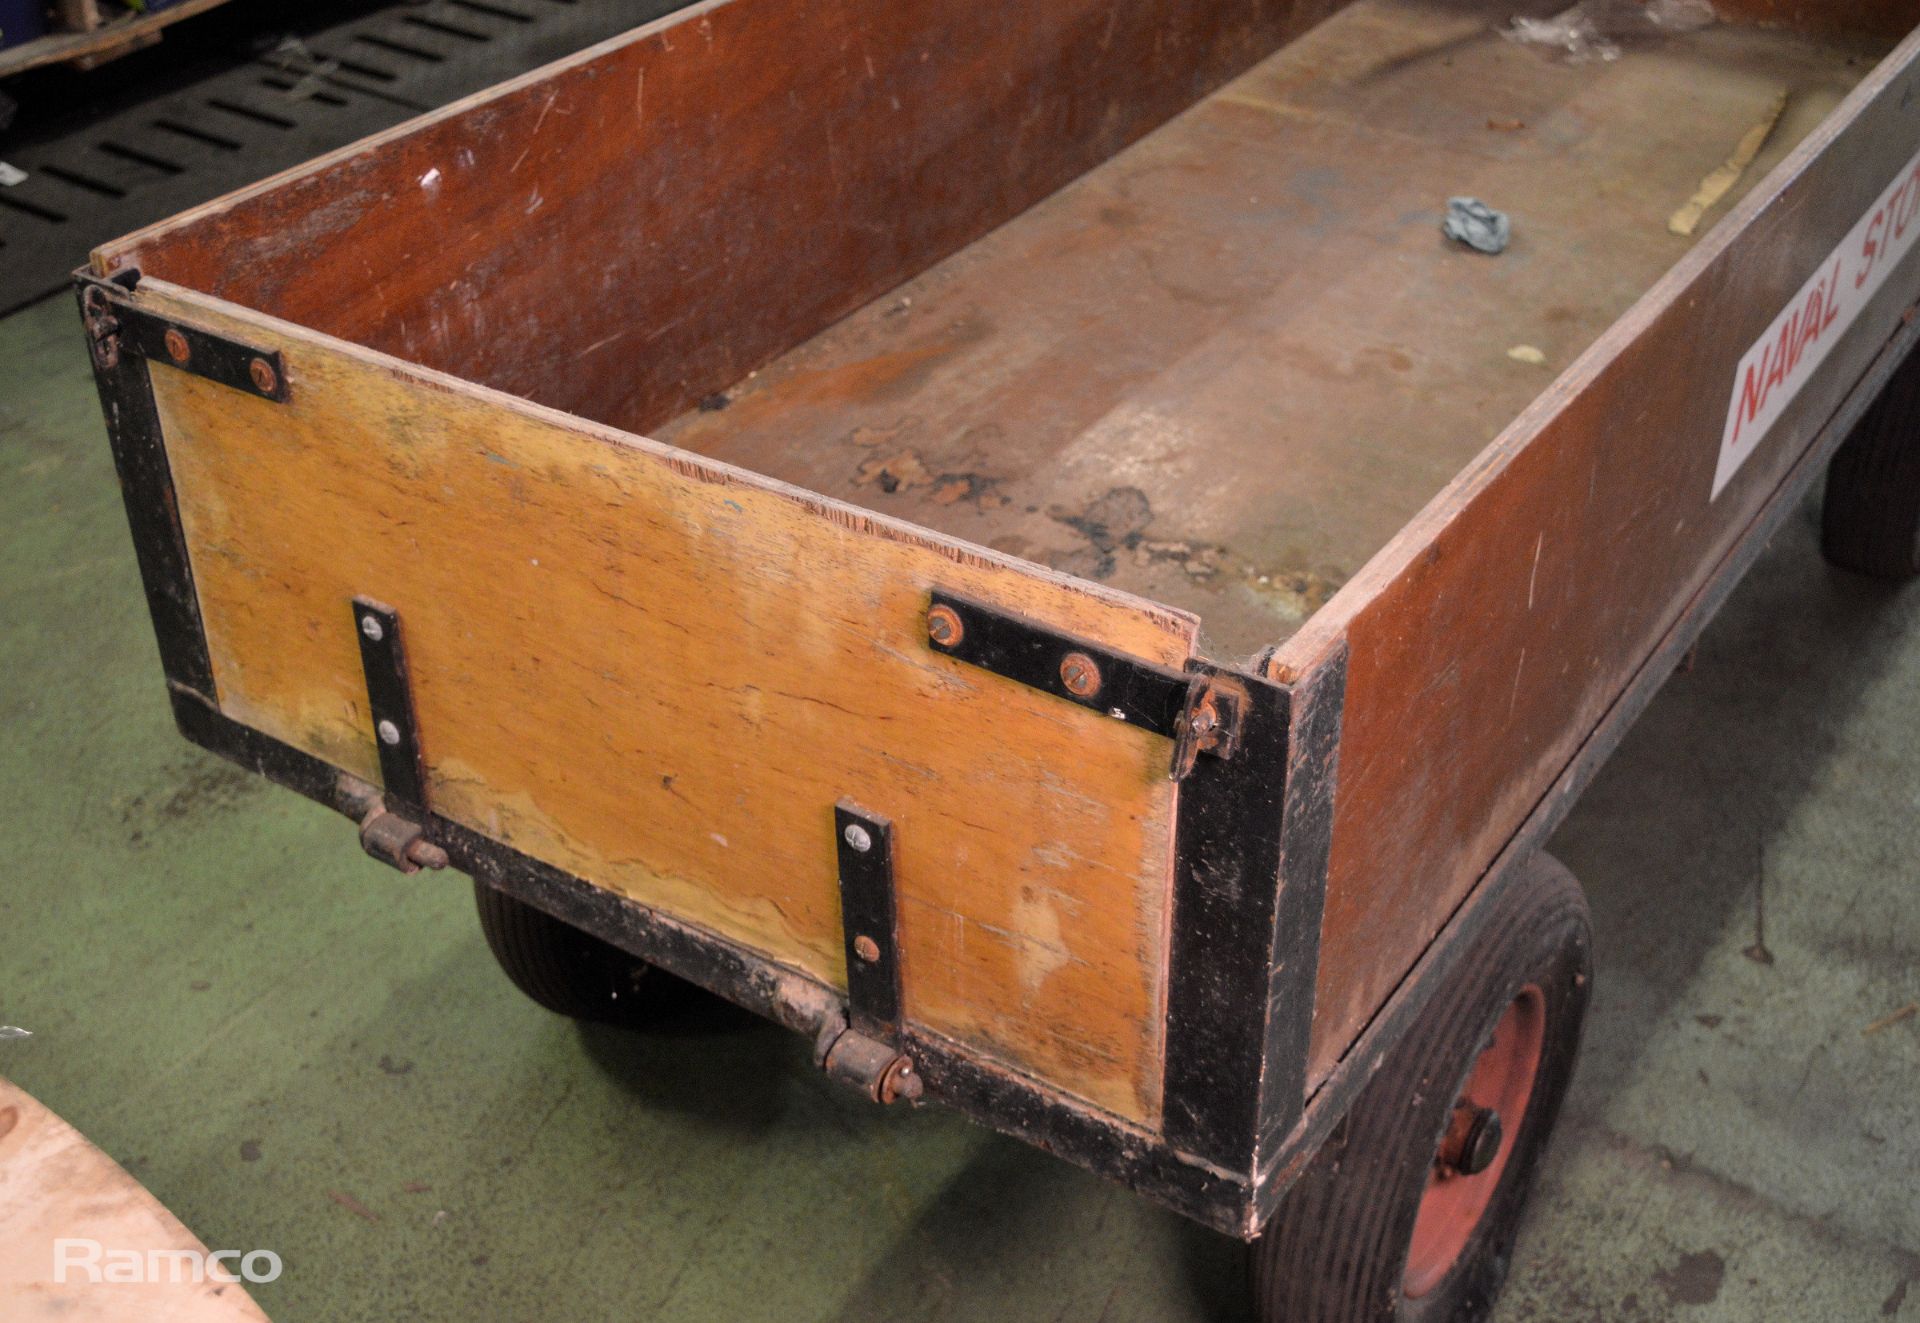 4 wheeled 4 wooden sided trolley - 2000mm (overall) x 750mm - Image 4 of 4